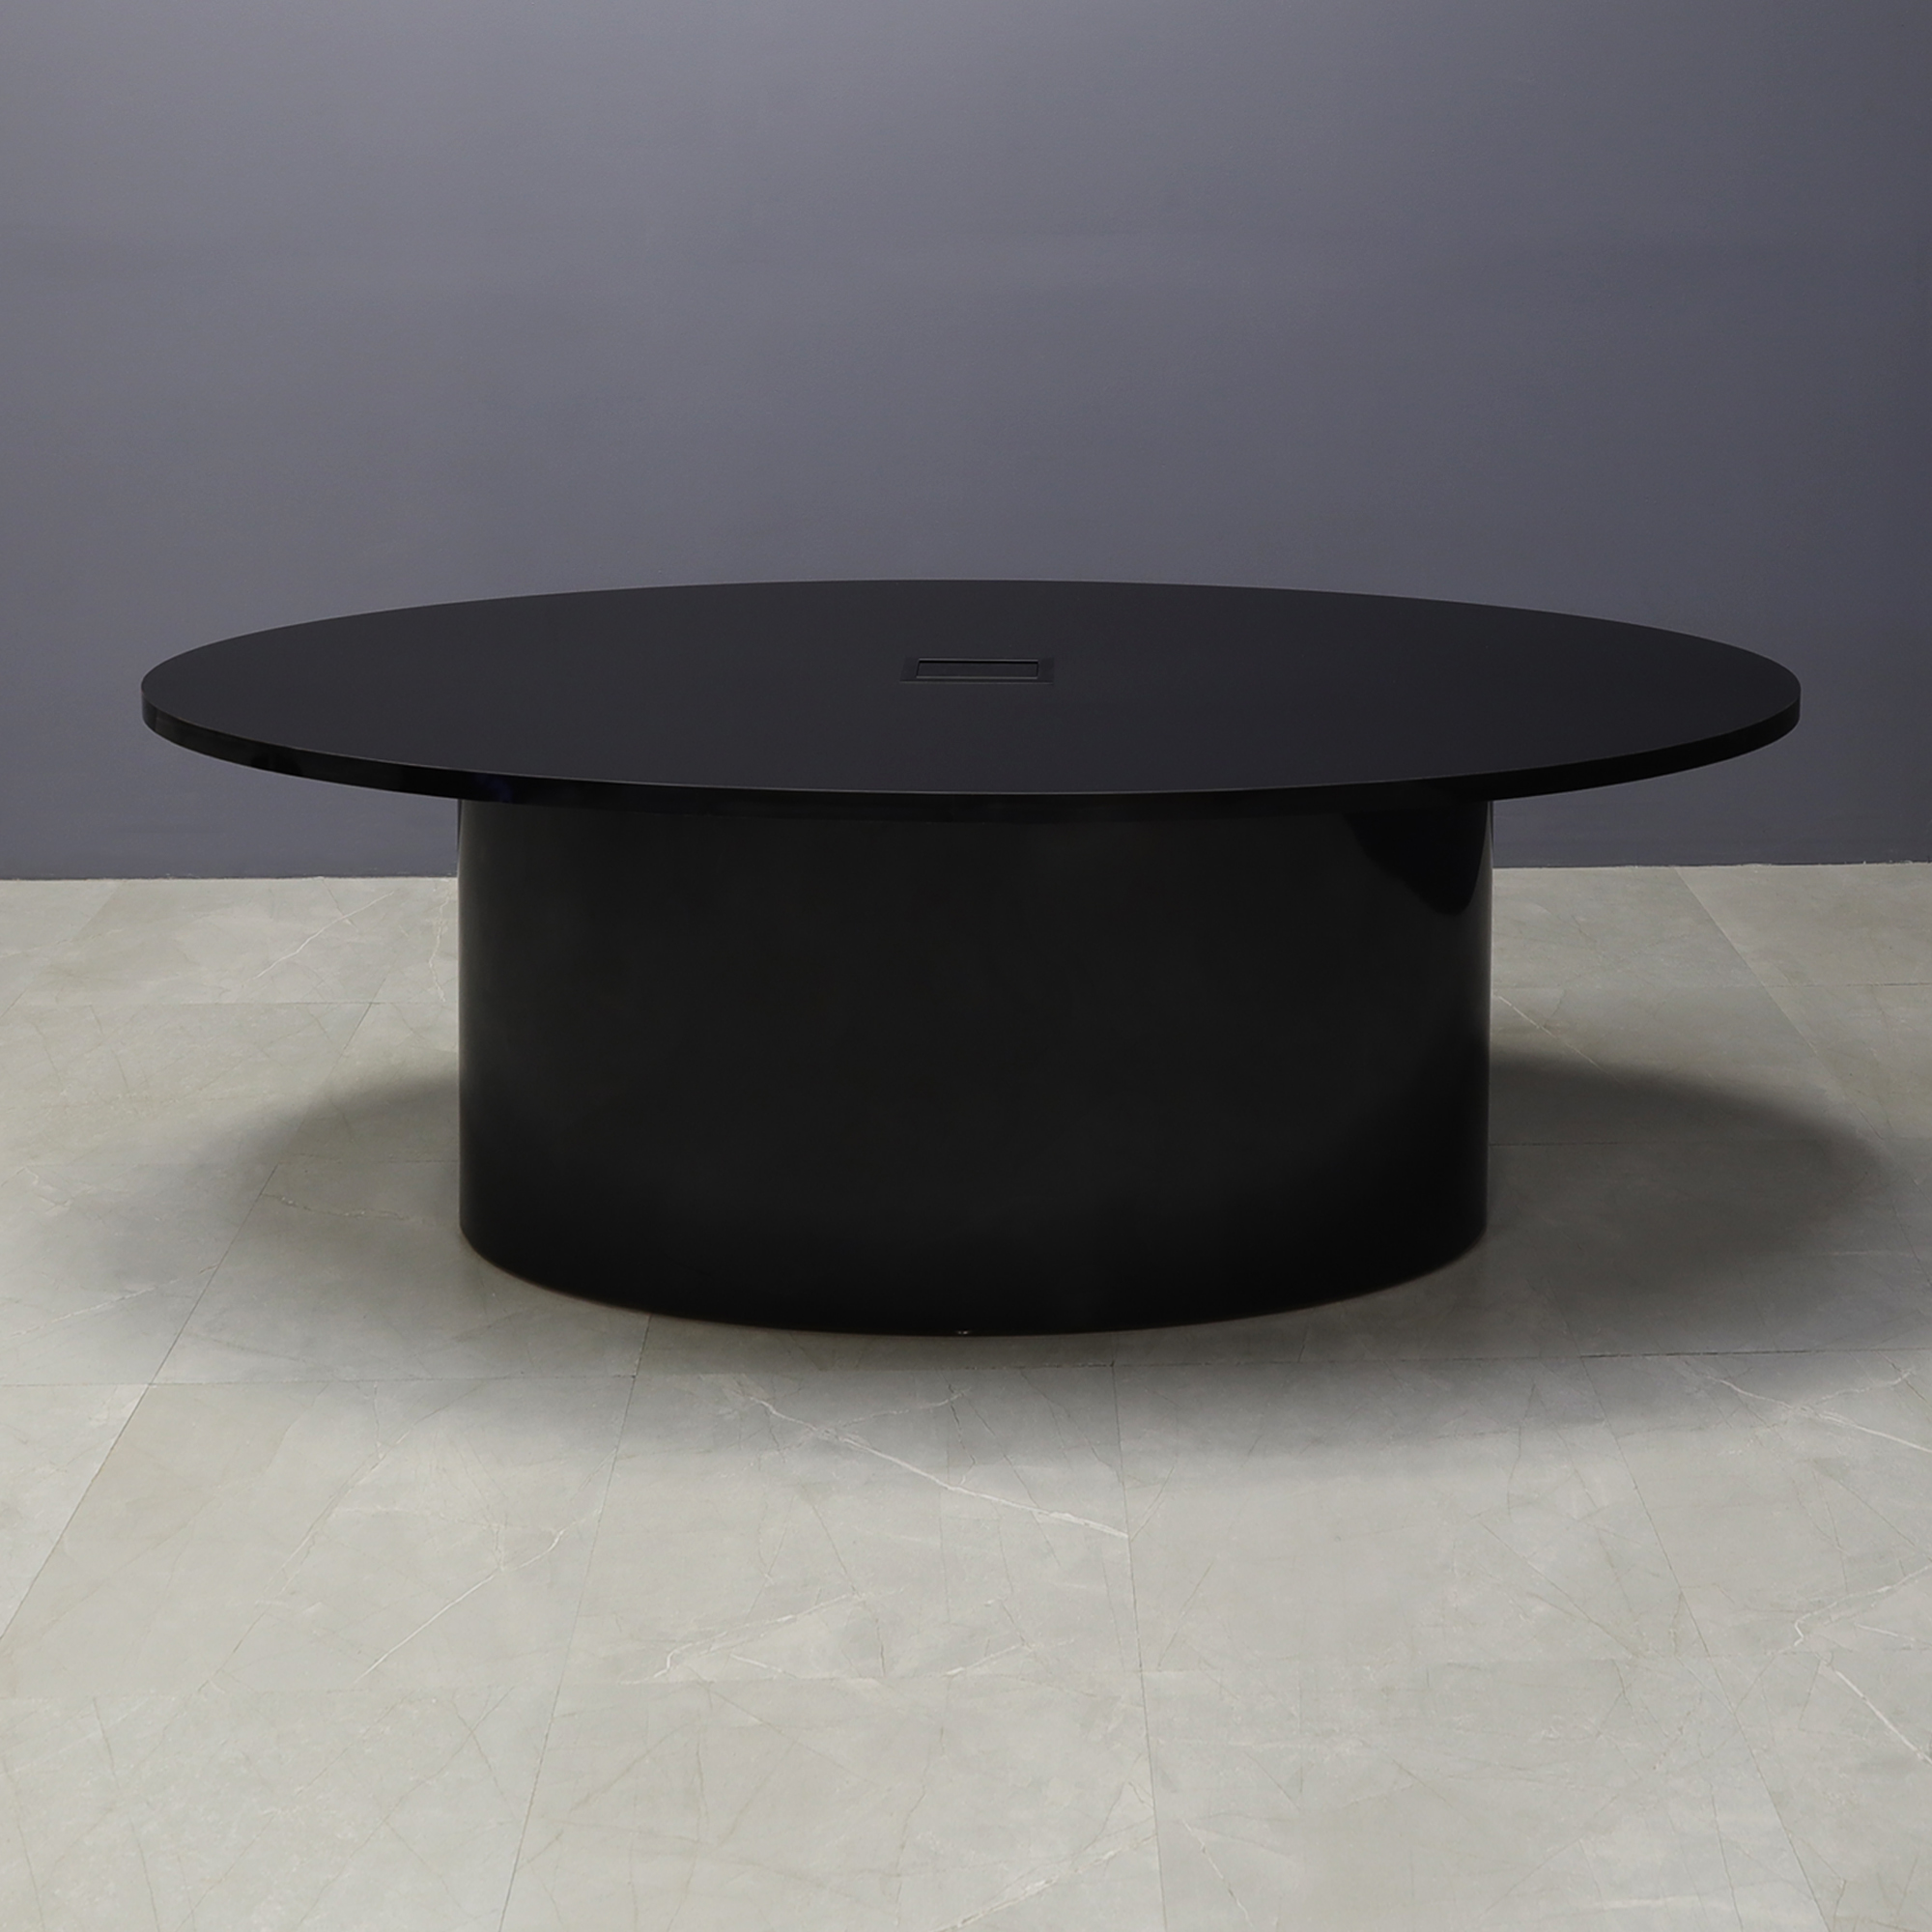 90-inch Newton Oval Conference Table With Laminate Top in black gloss laminate top and base, with black MX3 powerbox, shown here.